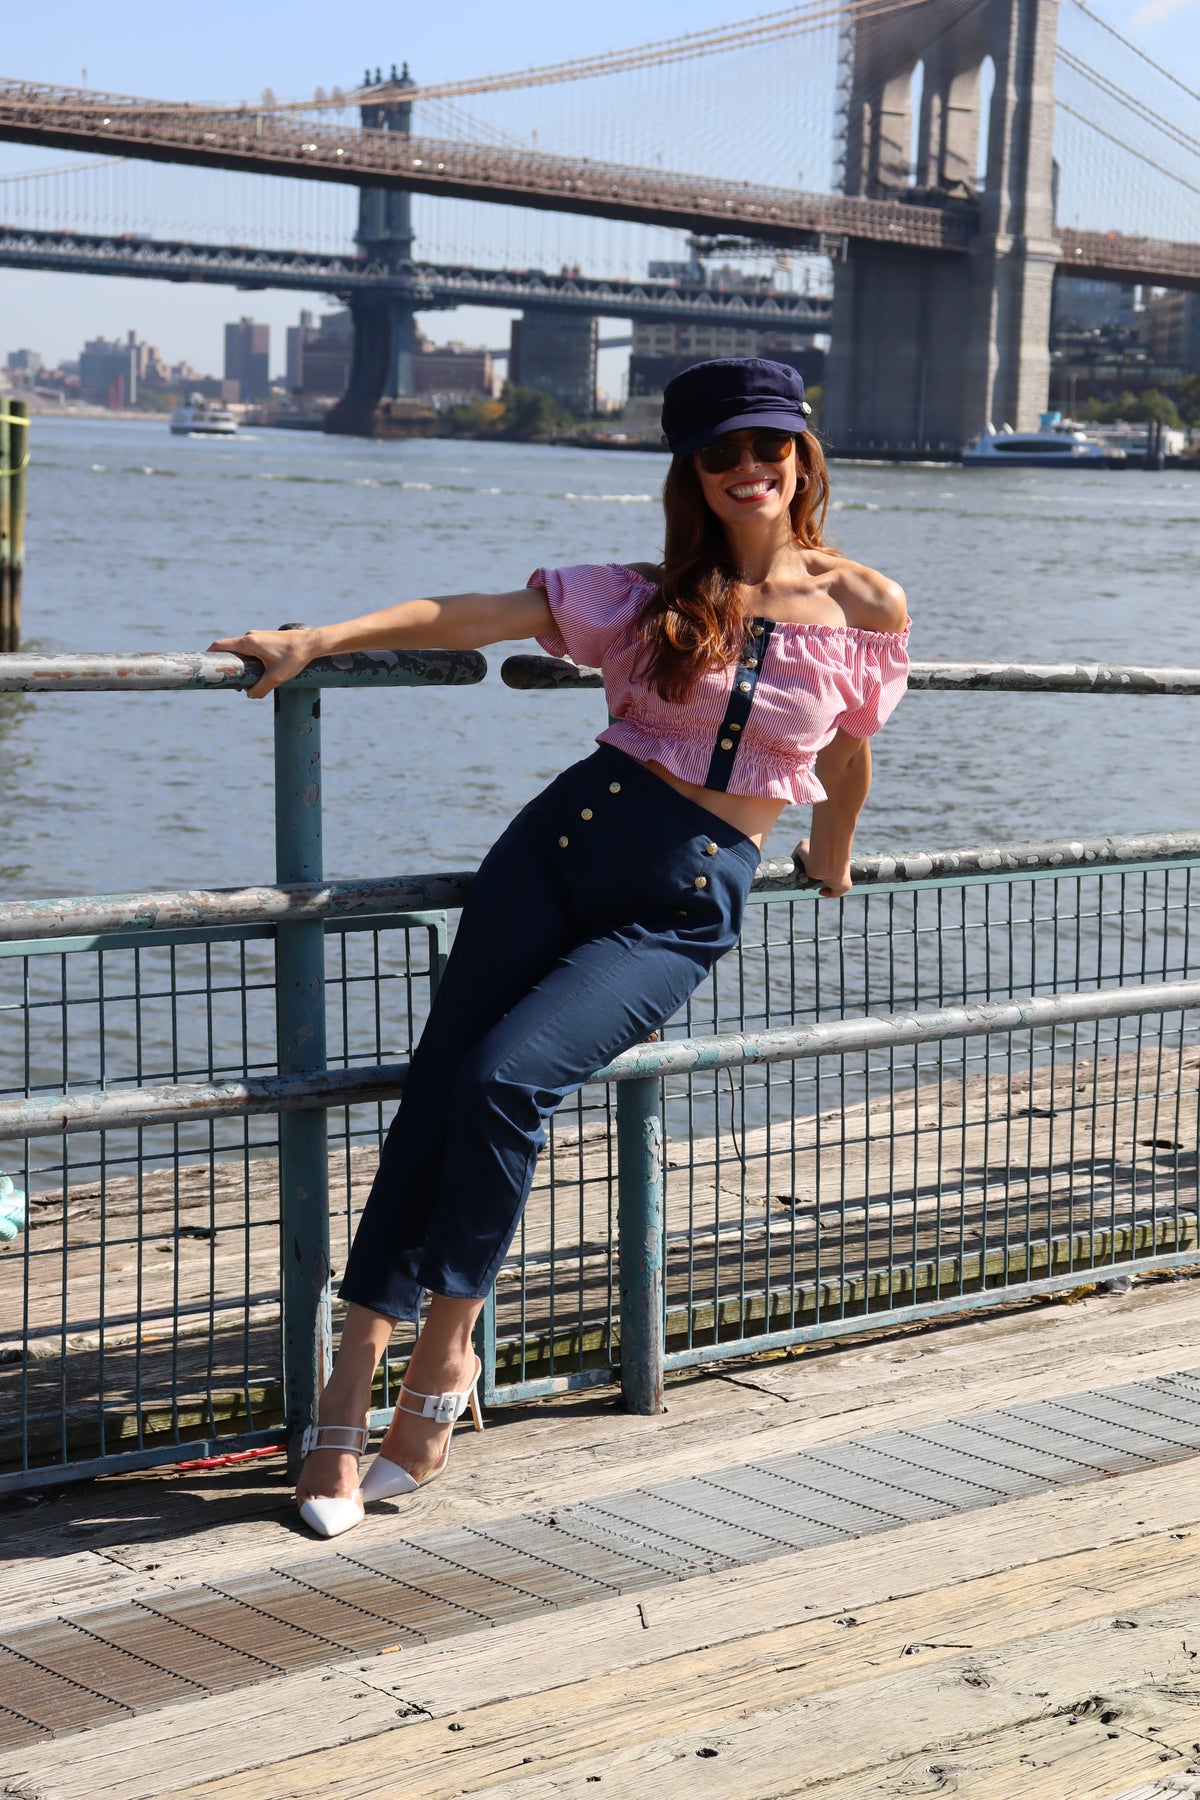 Model wearing jib top, navy cotton port capris and blue hat leaning against a railing smiling.